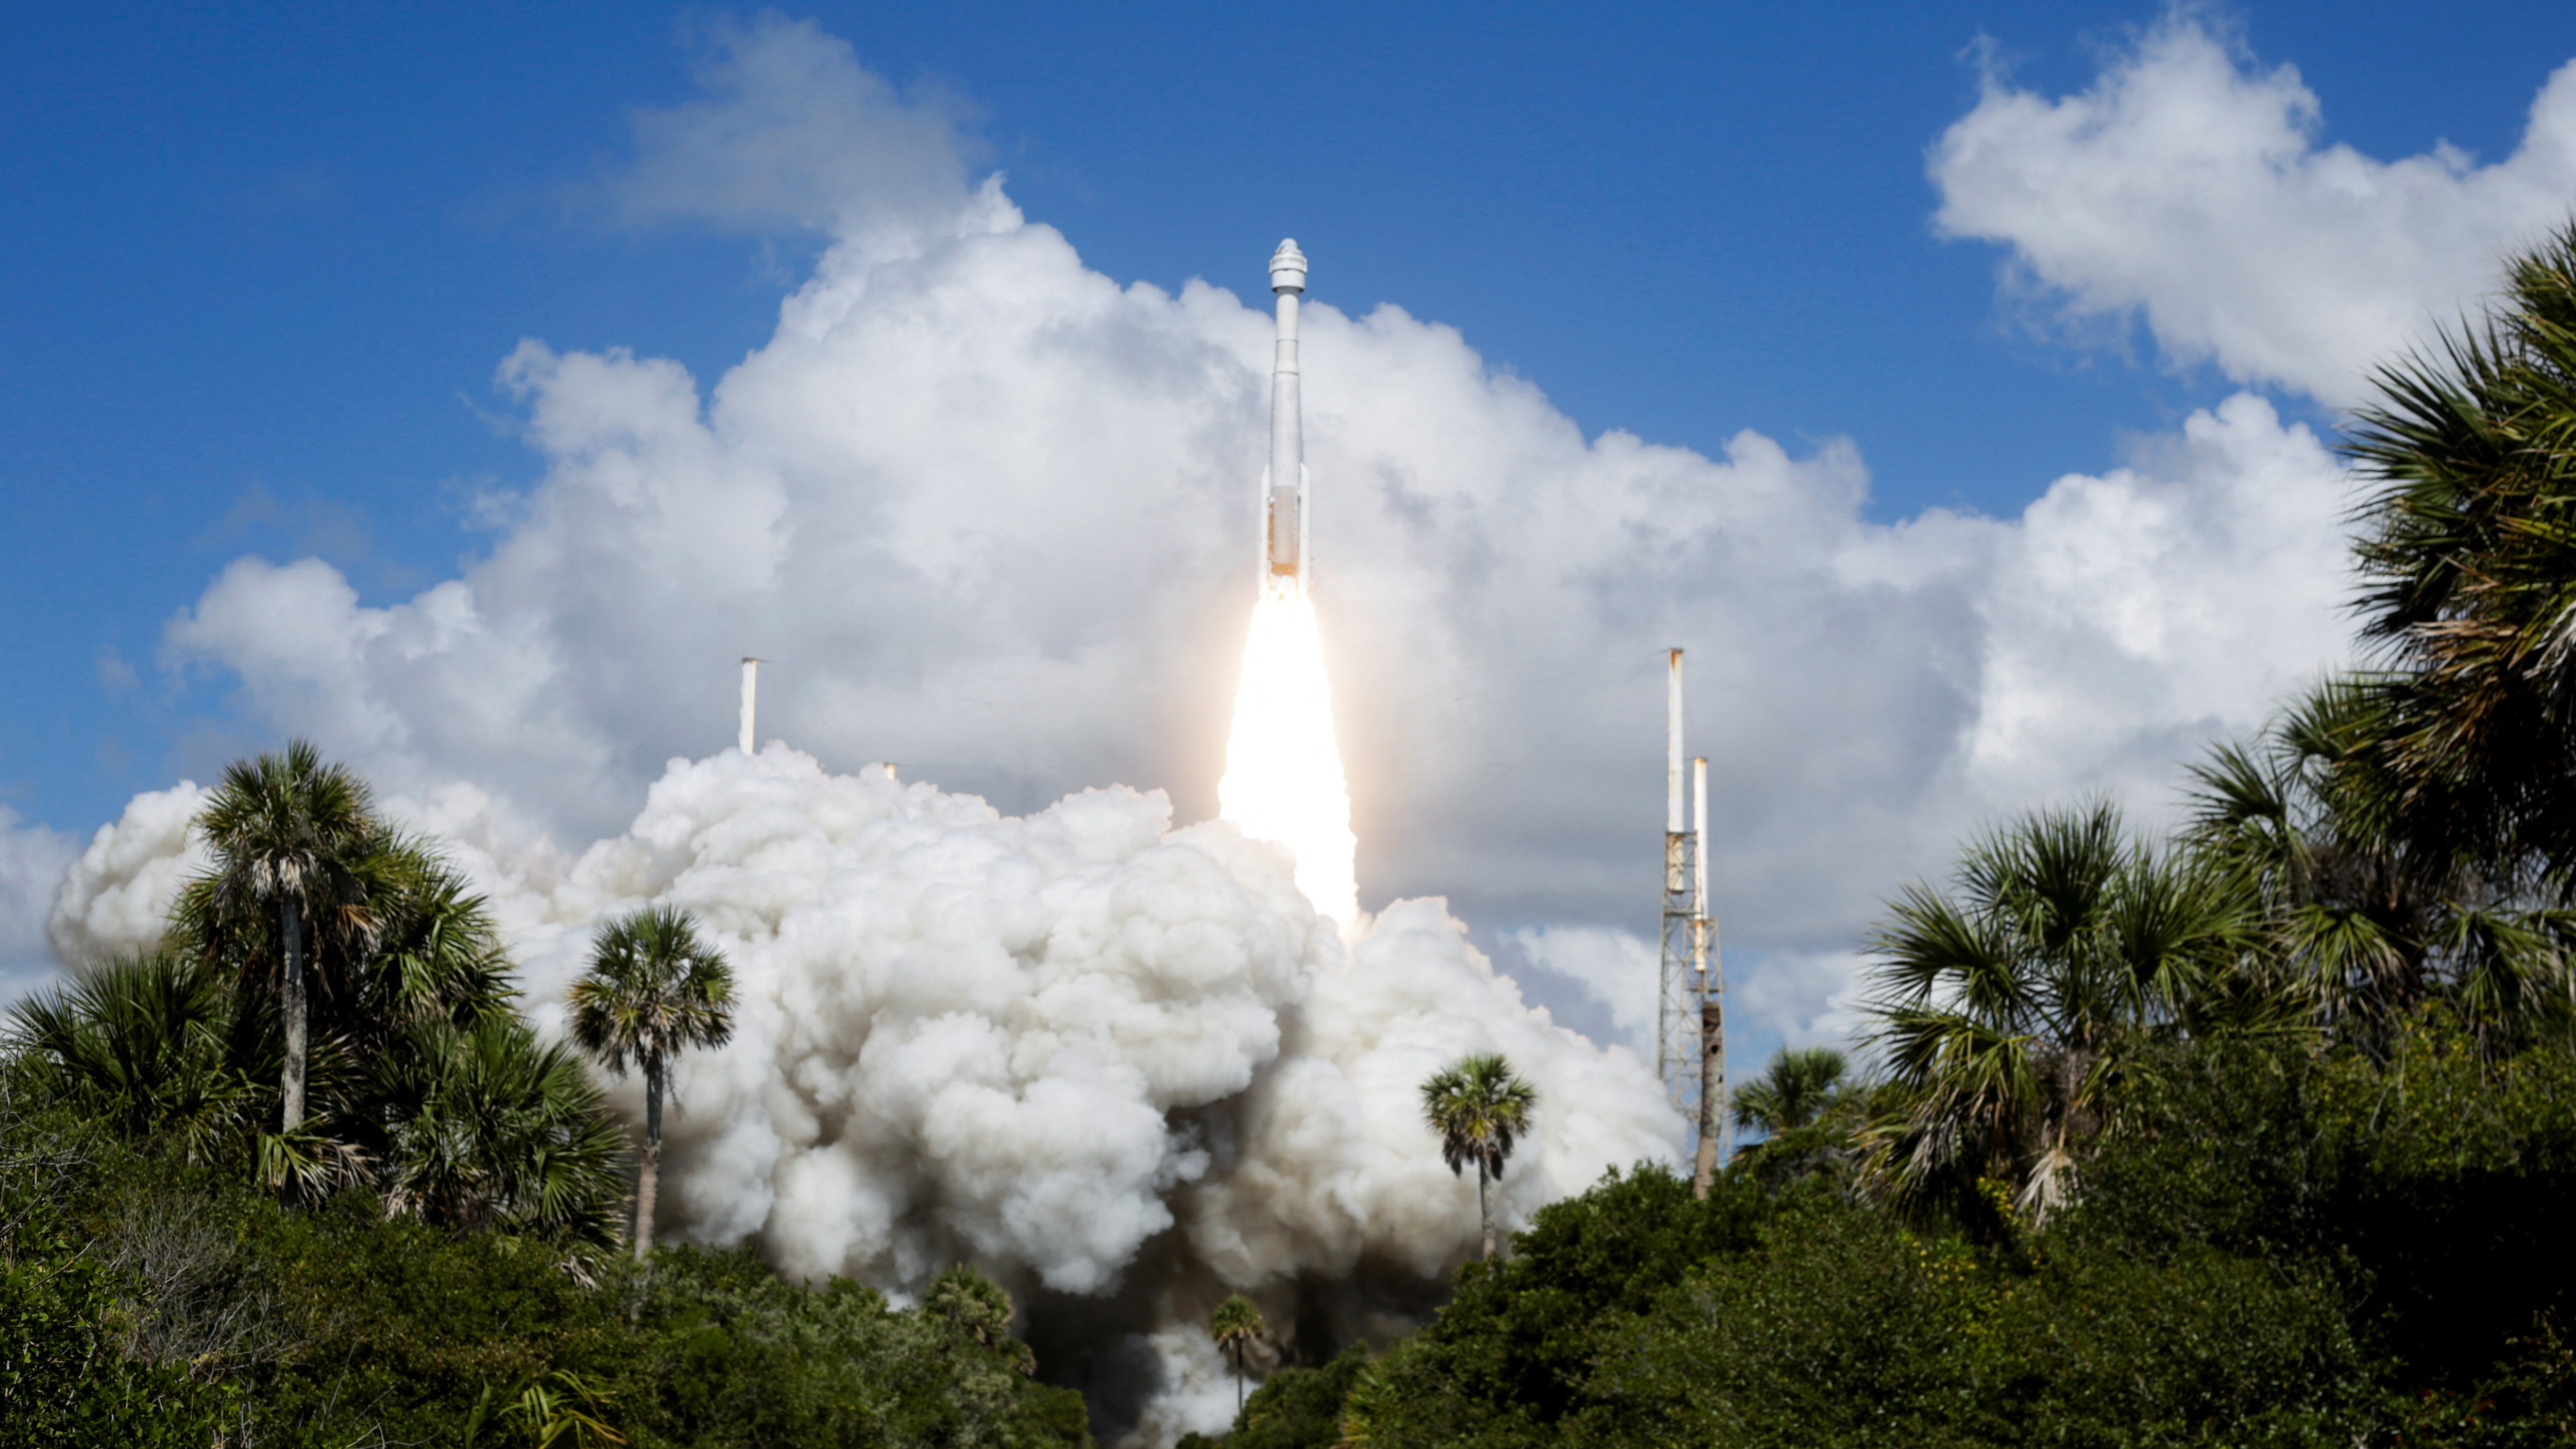 The spacecraft lifts off from Cape Canveral, Florida on a mission to the International Space Station